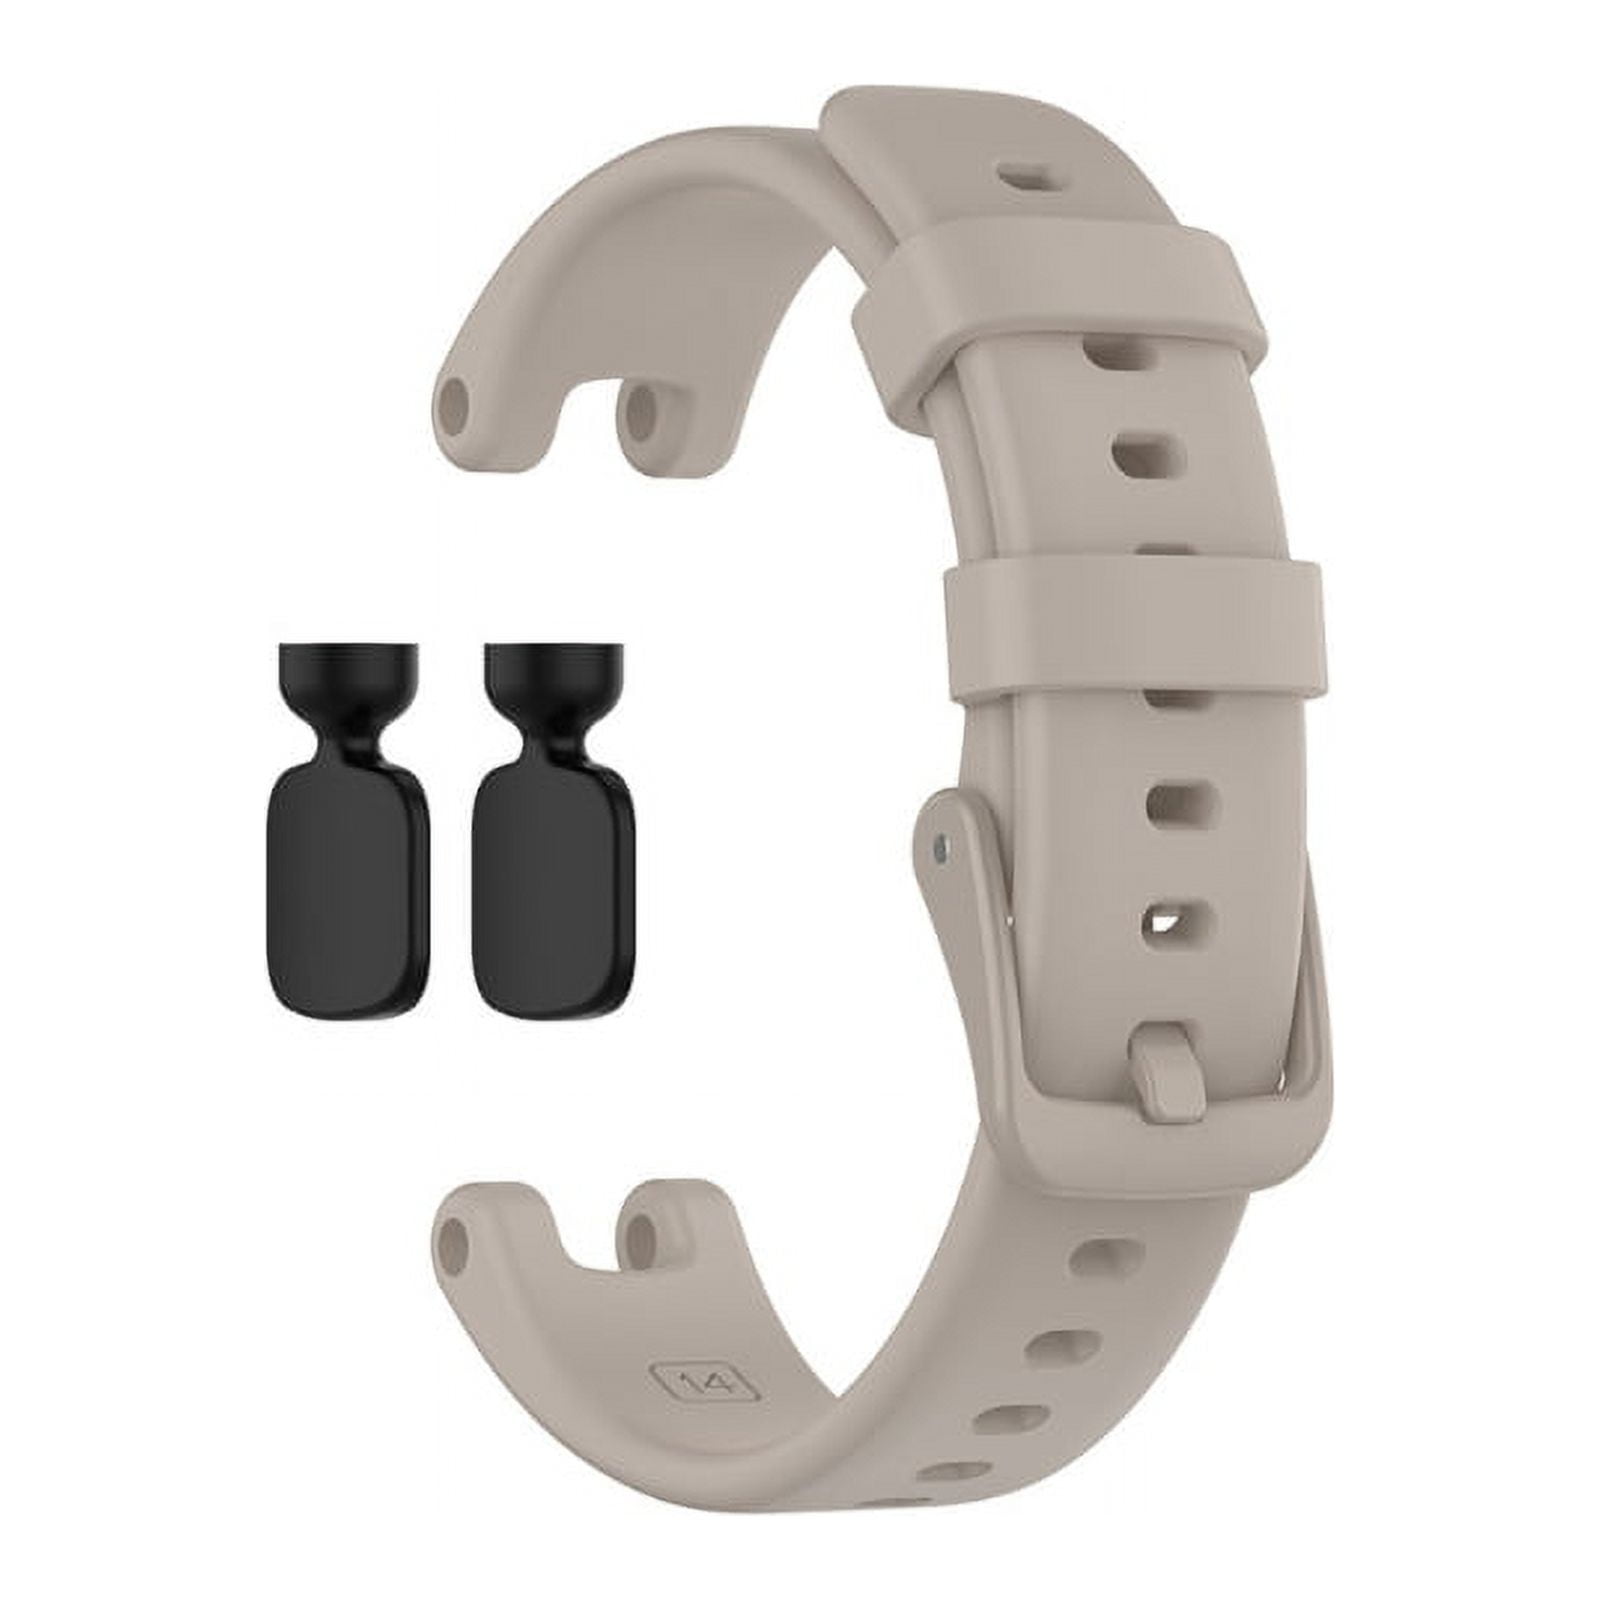 Silicone Replacement Watch Band For Garmin Forerunner 745 Sport Wristband  Accessory From Wholesale Factory From Ivylovme, $1.03